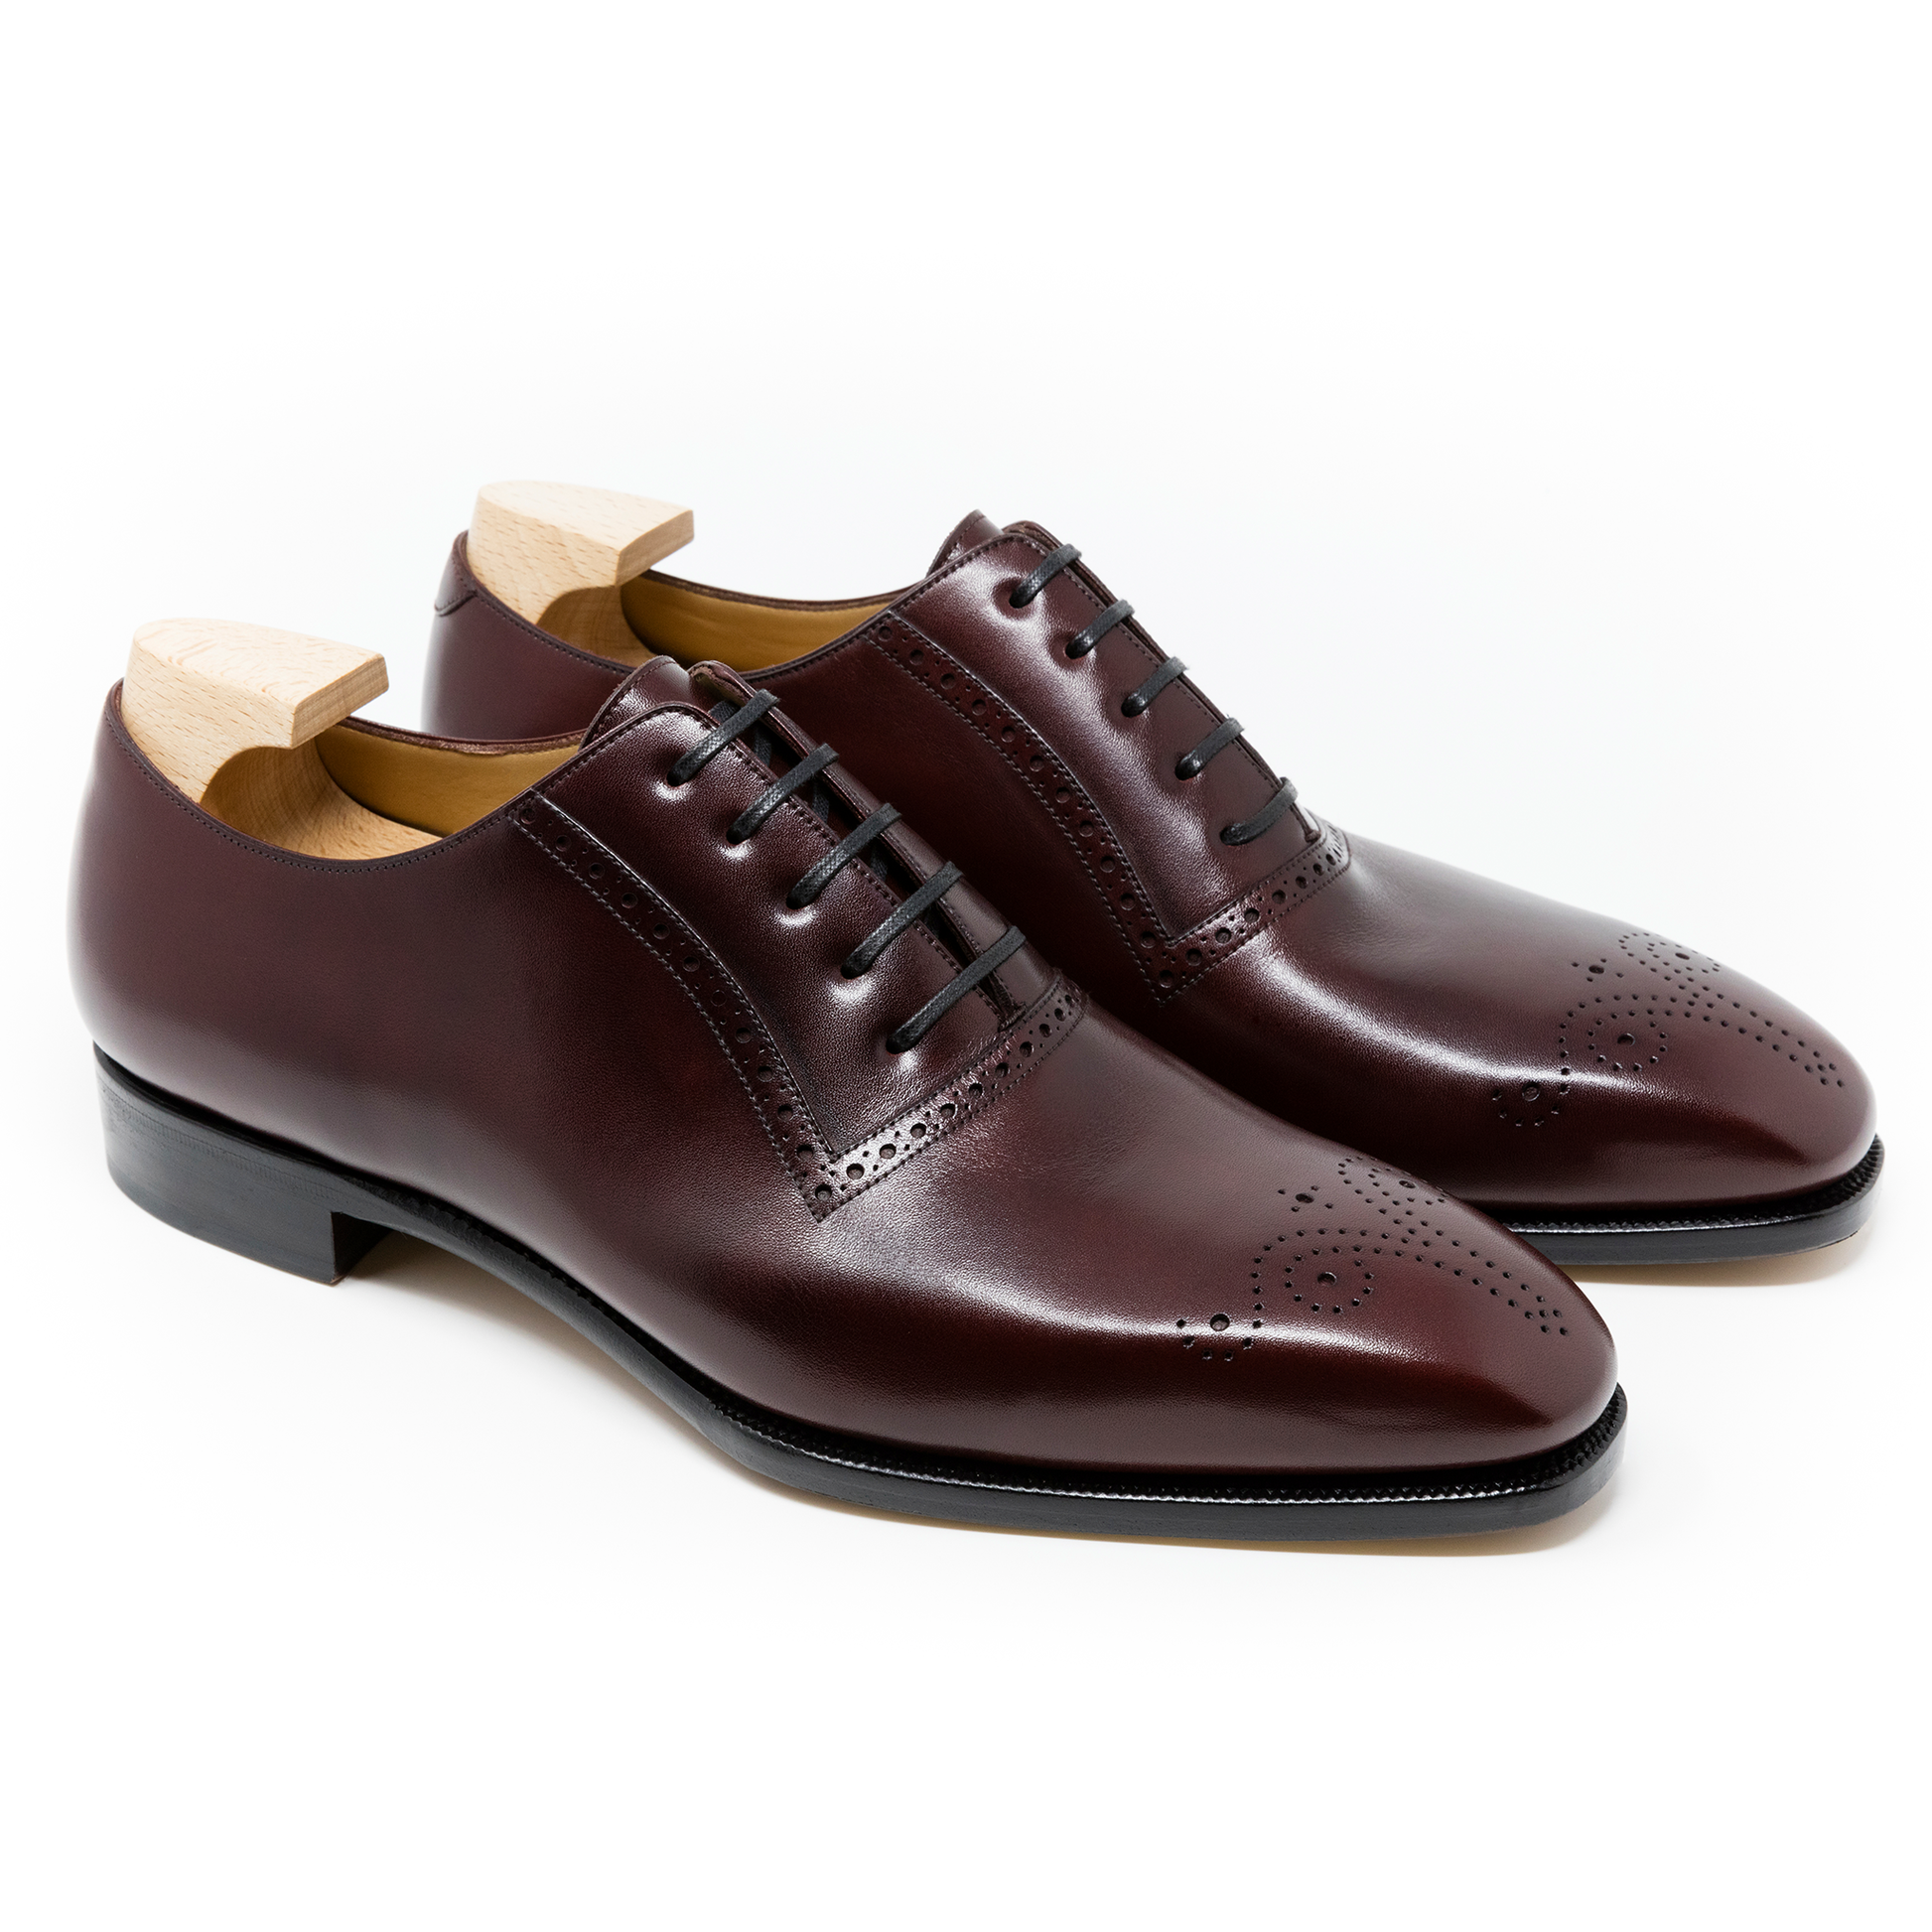 TLB Mallorca leather shoes 107 / PICASSO / VEGANO BURGUNDY